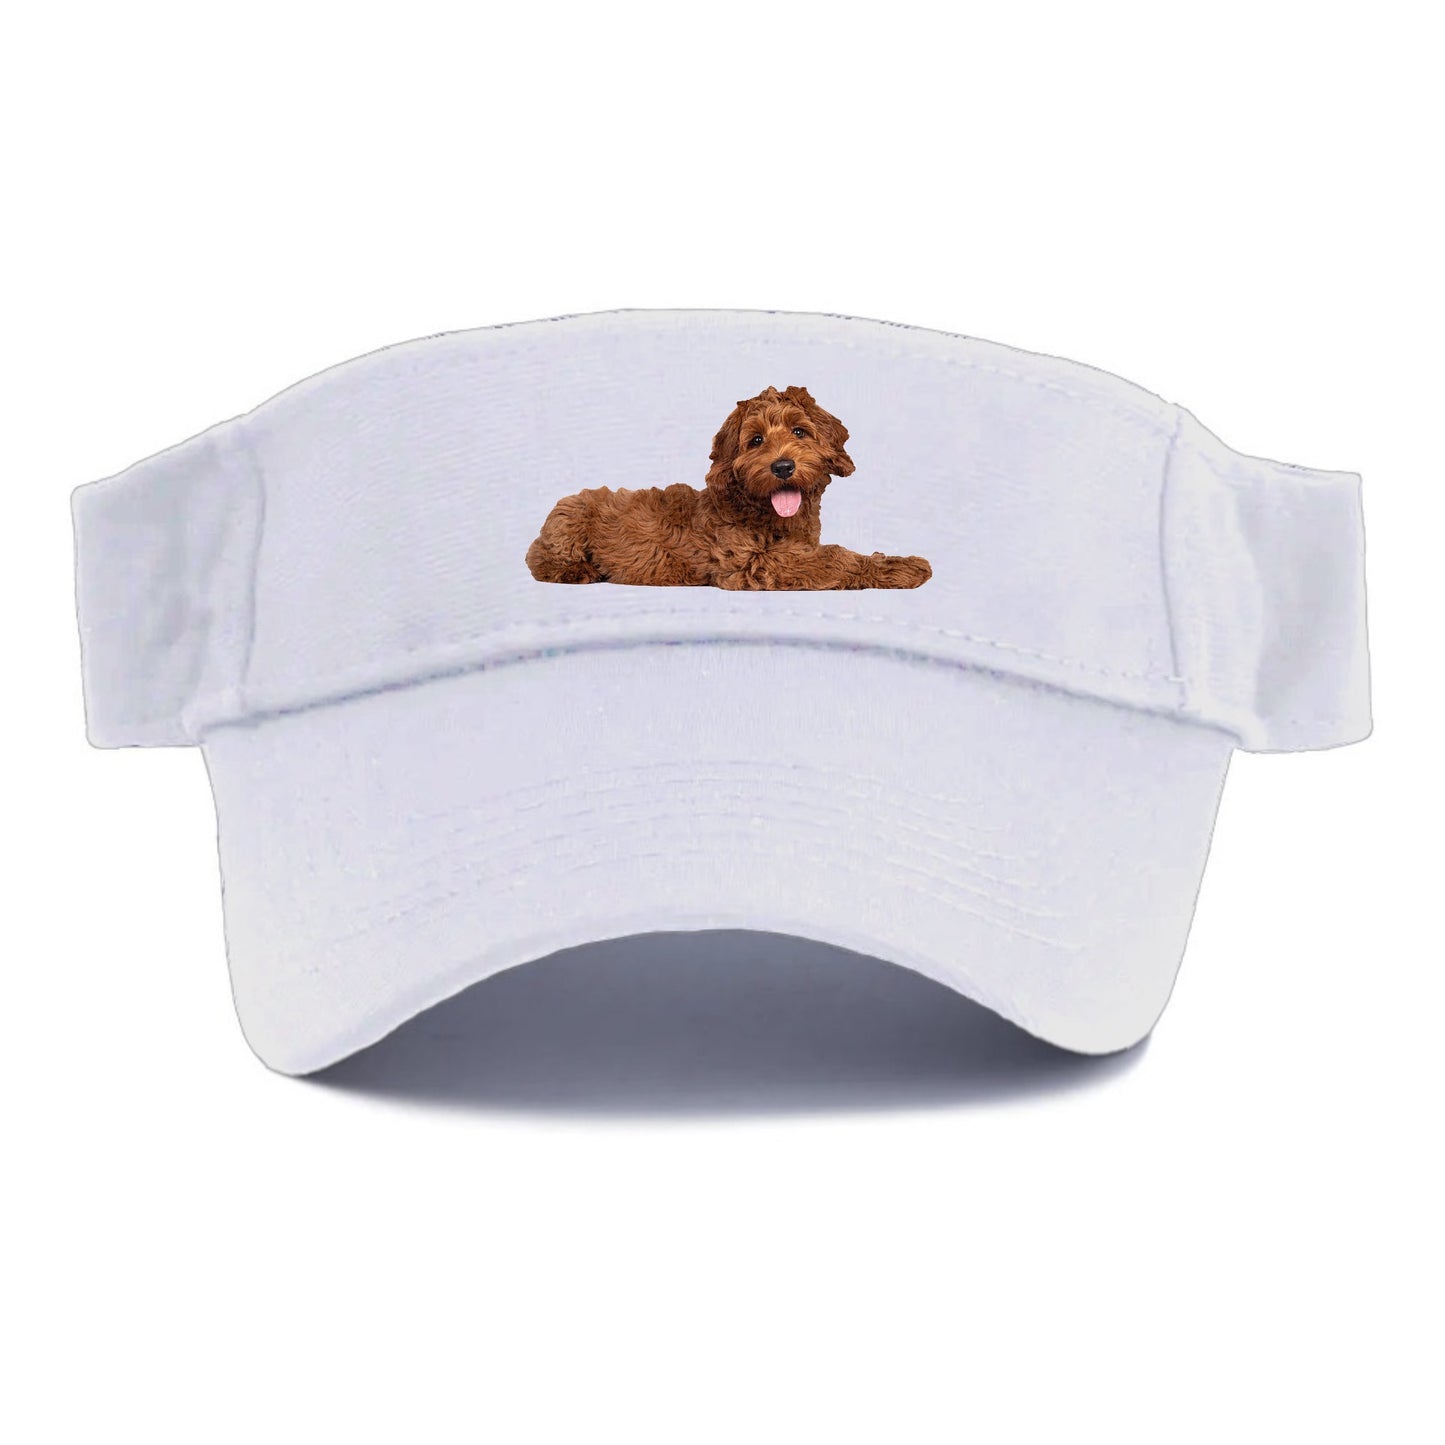 Labradoodle laying down Hat